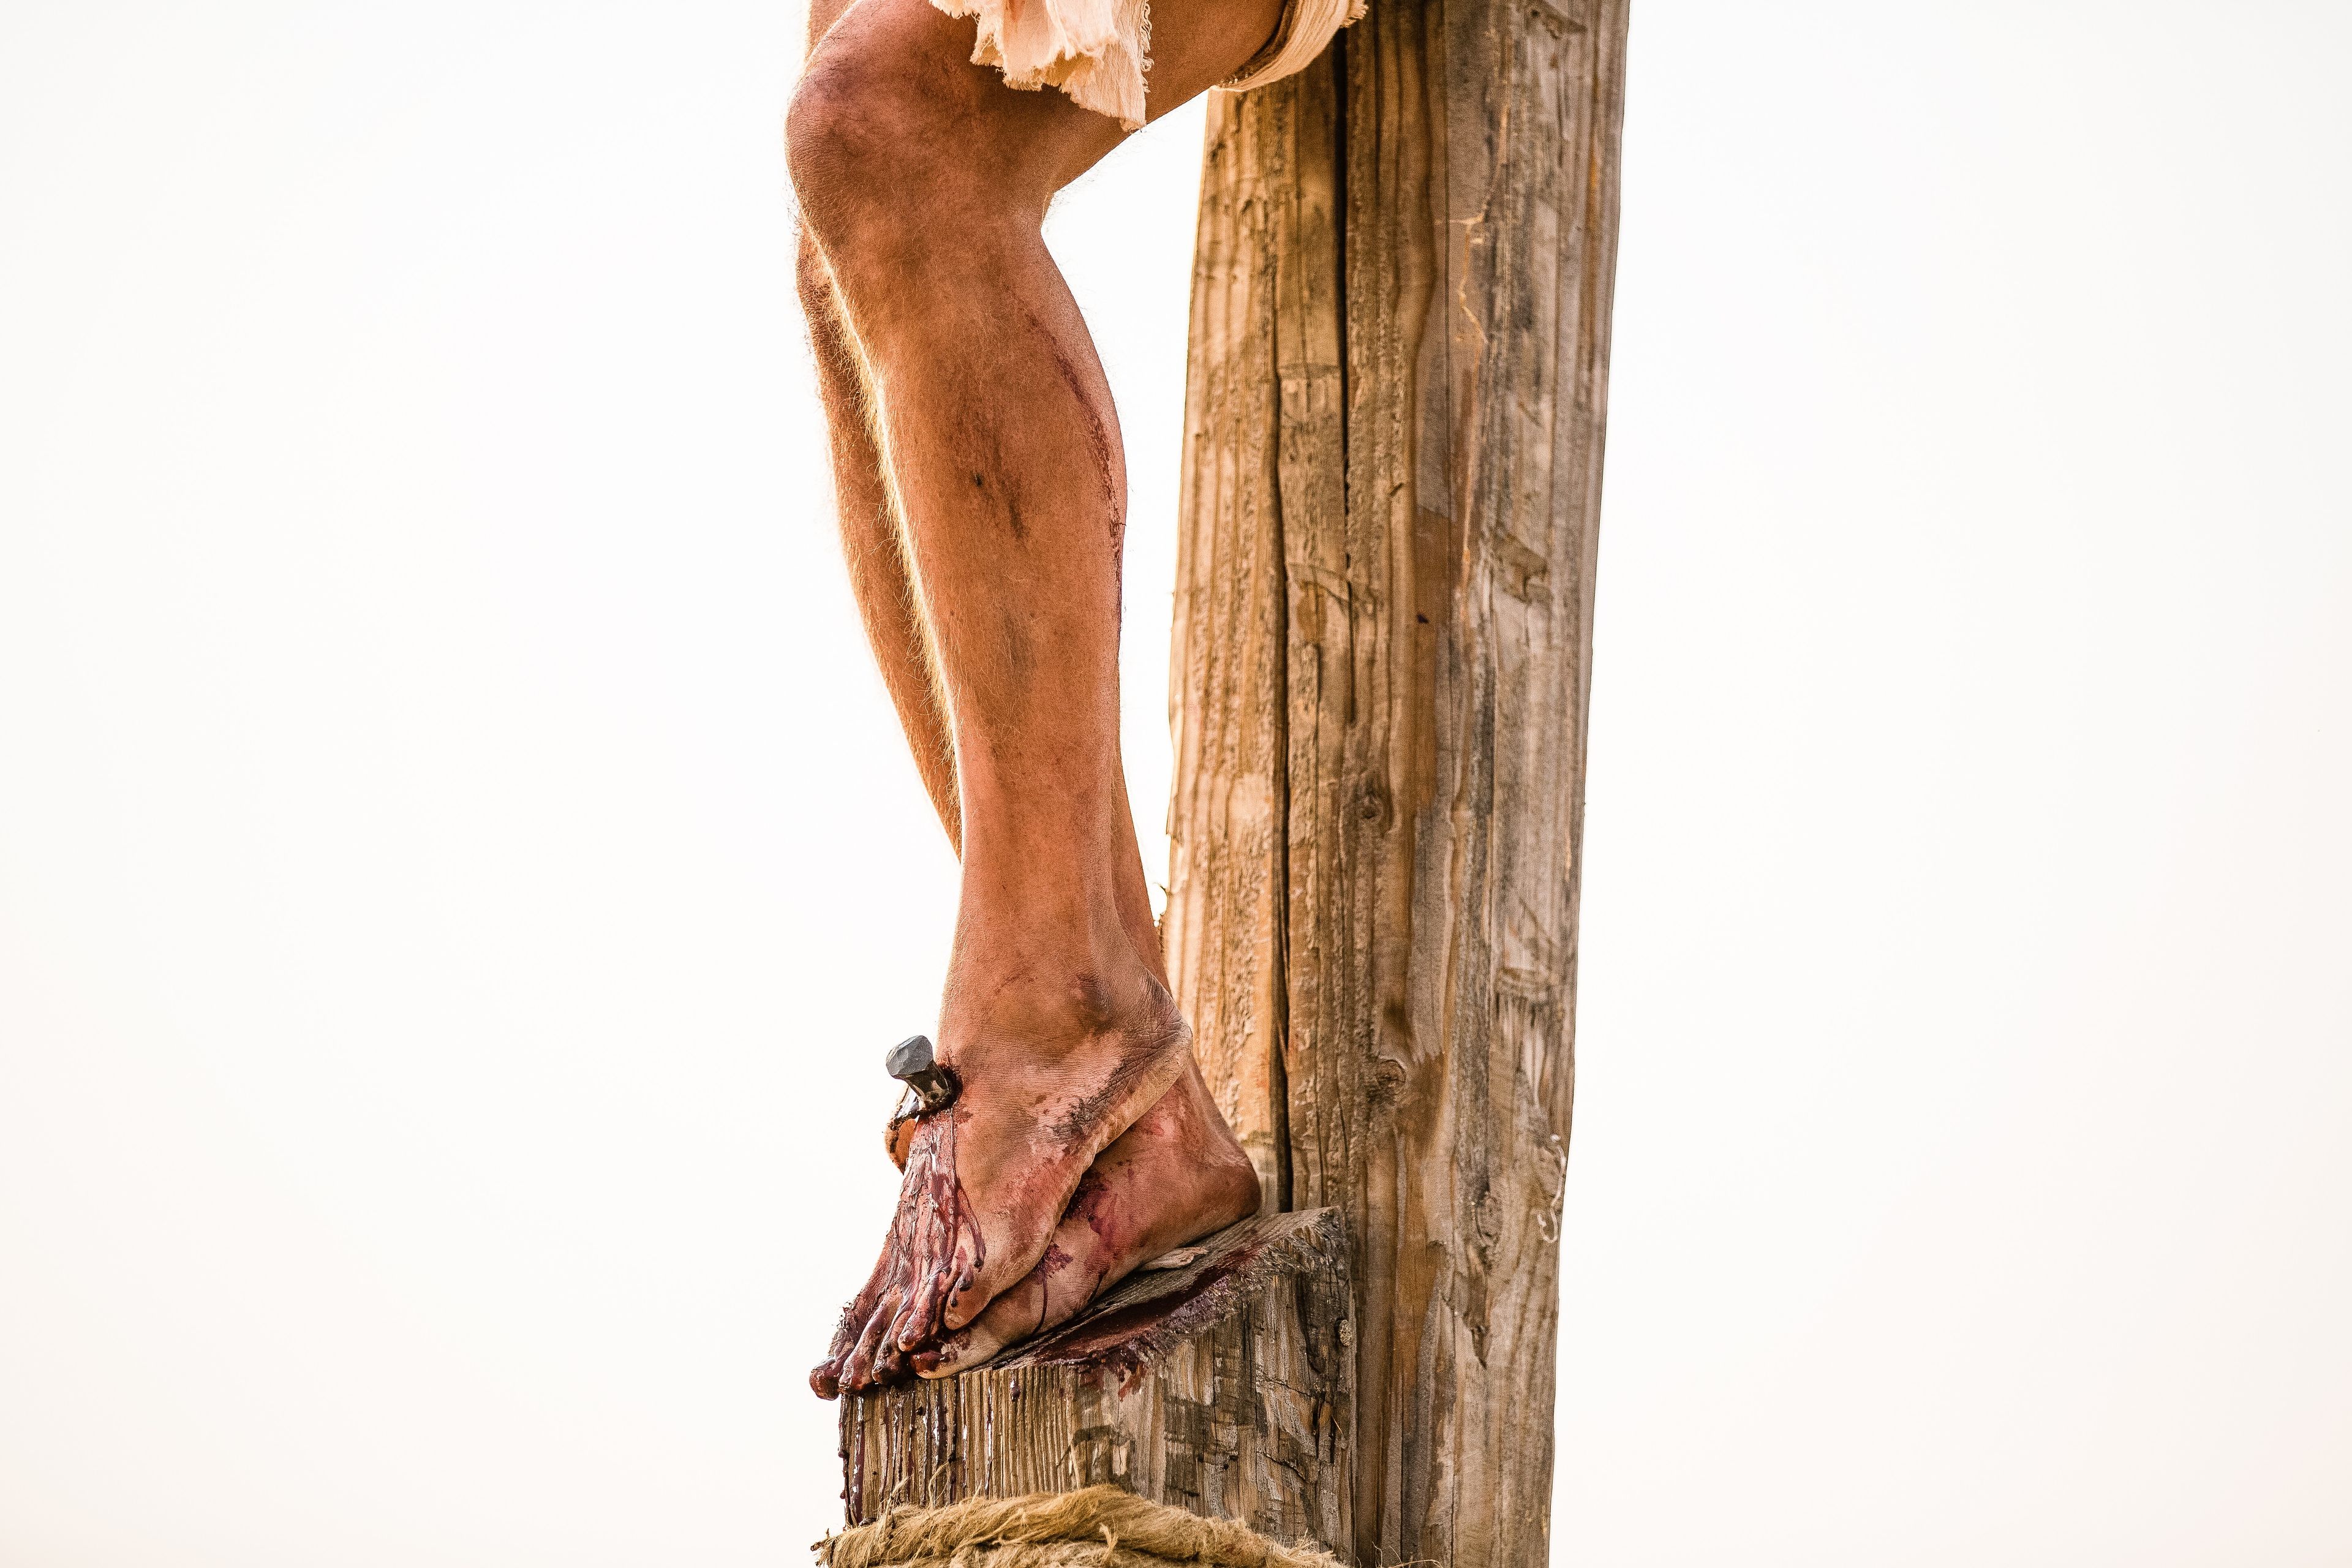 A detail of Christ’s feet nailed to the cross.